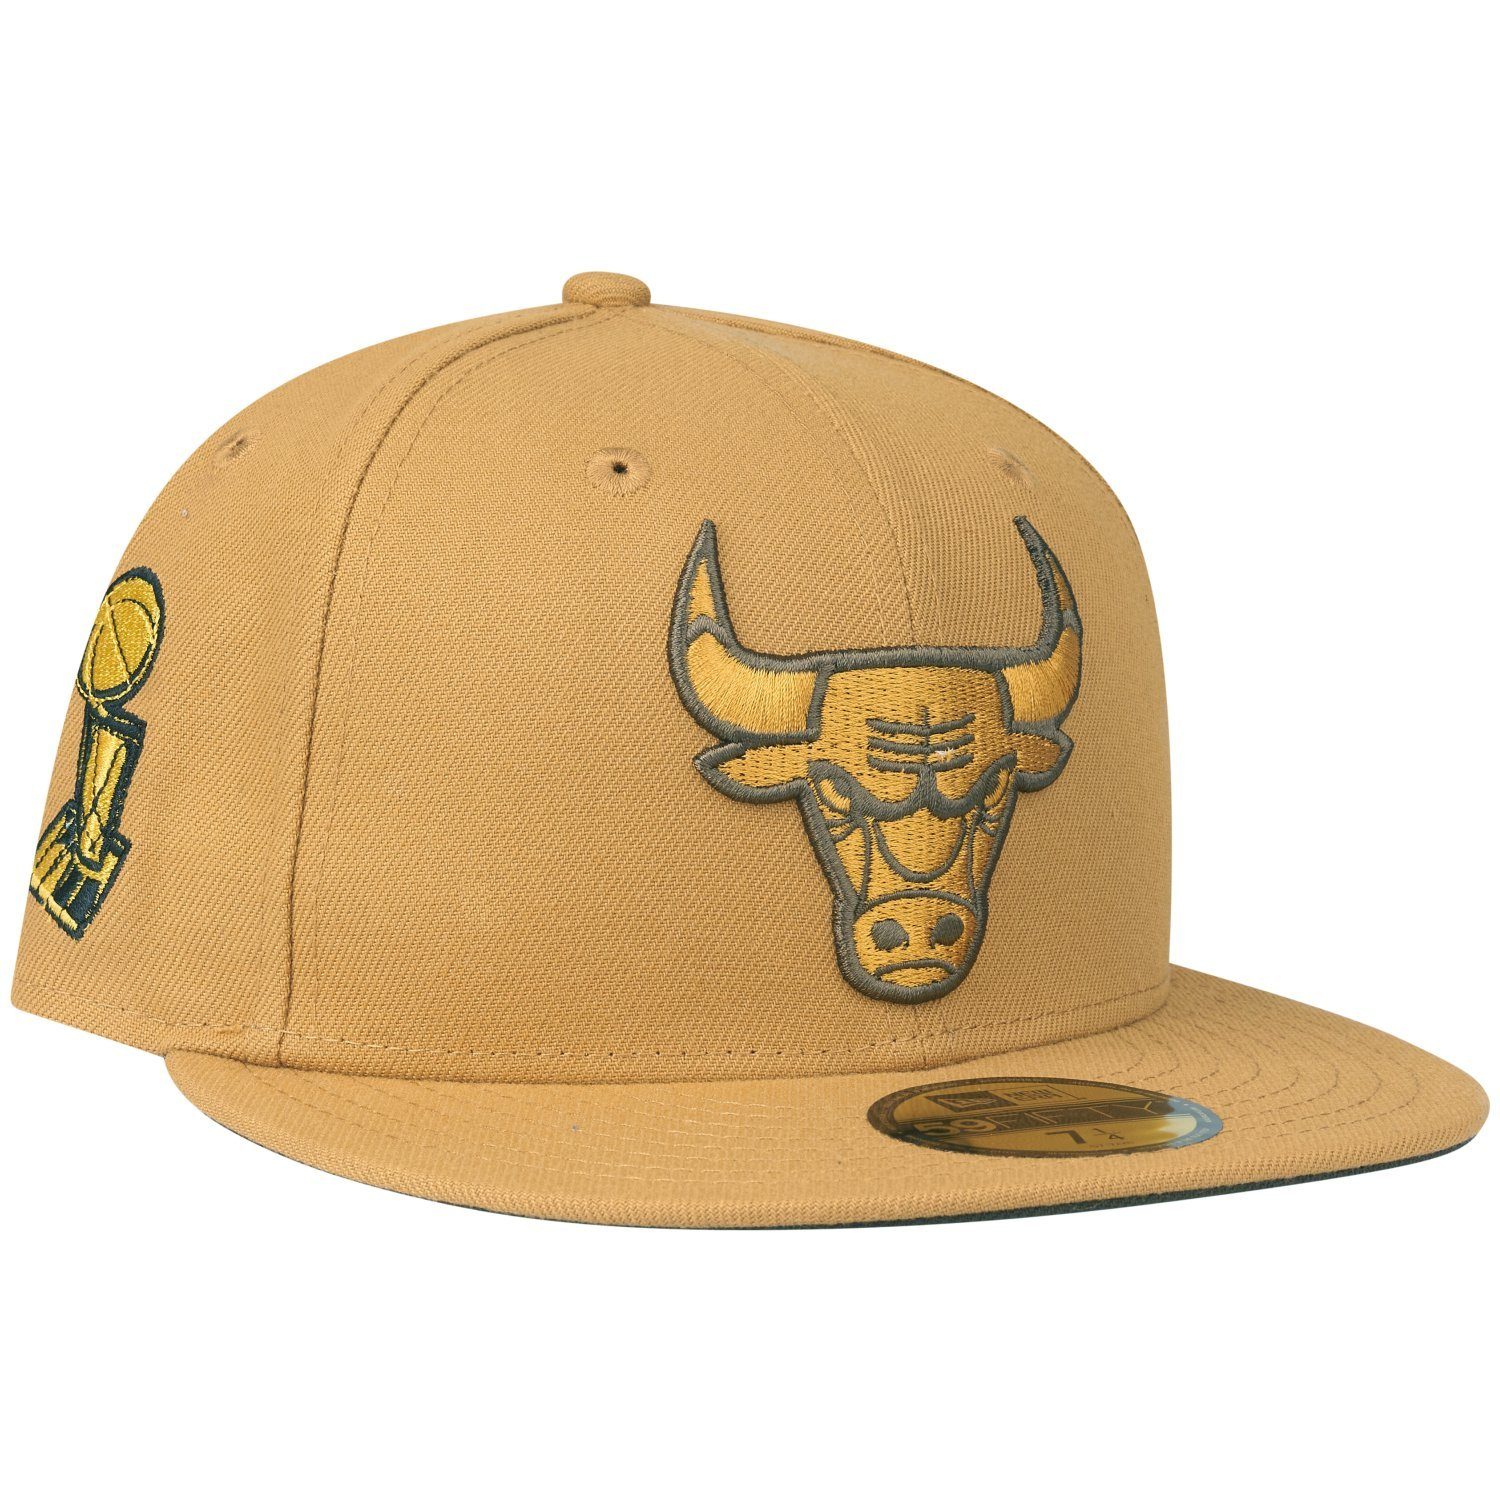 New Era Fitted Cap 59Fifty CHAMPS Chicago Bulls panama